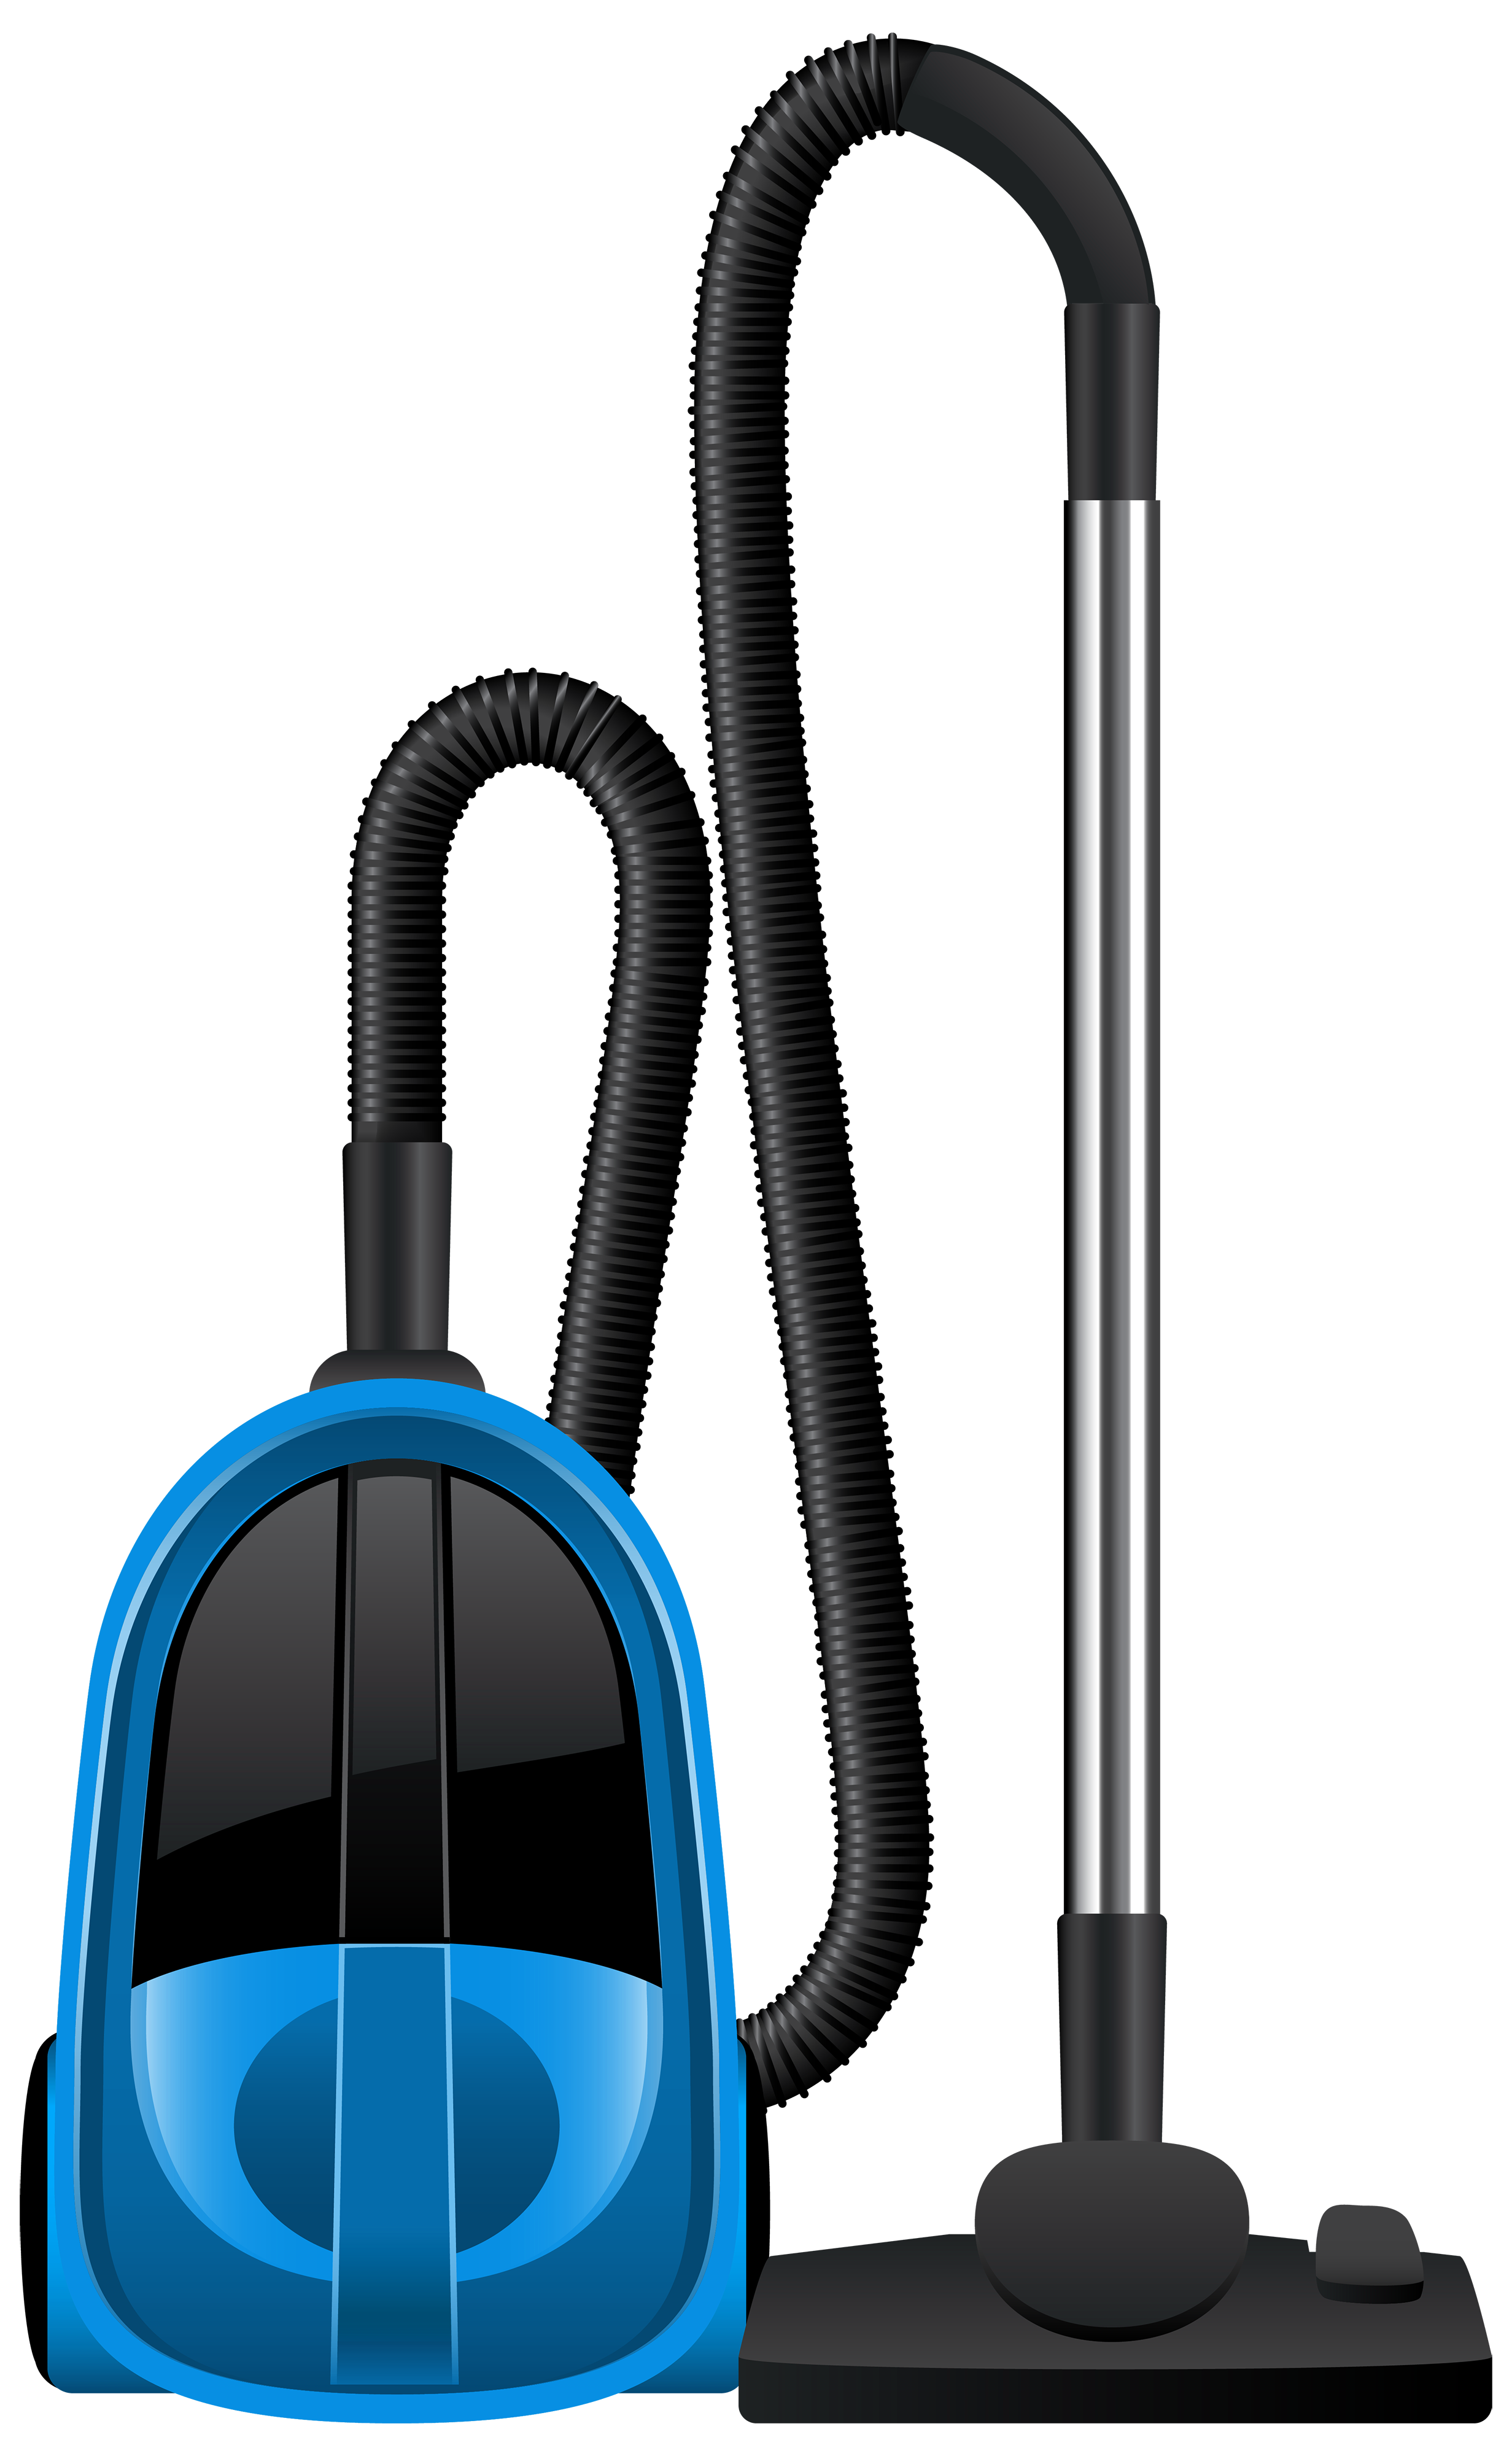 Blue Vacuum Cleaner PNG Clipart.